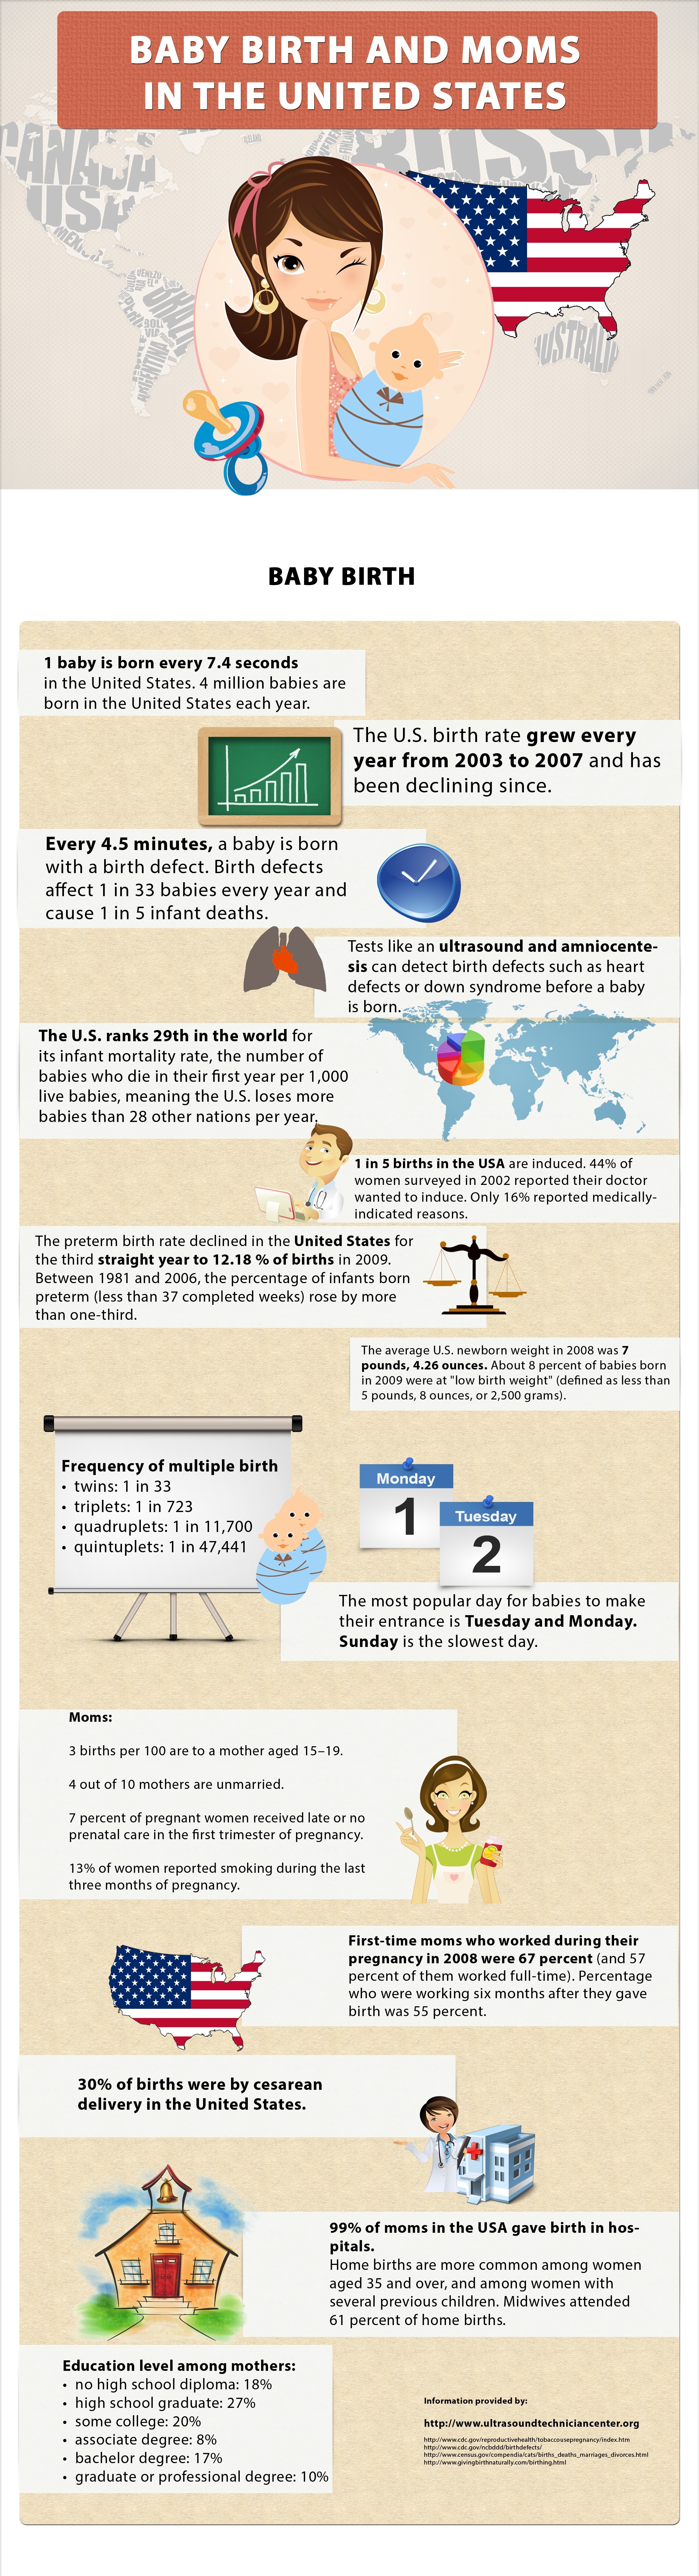 Baby Birth and Mom in the United States